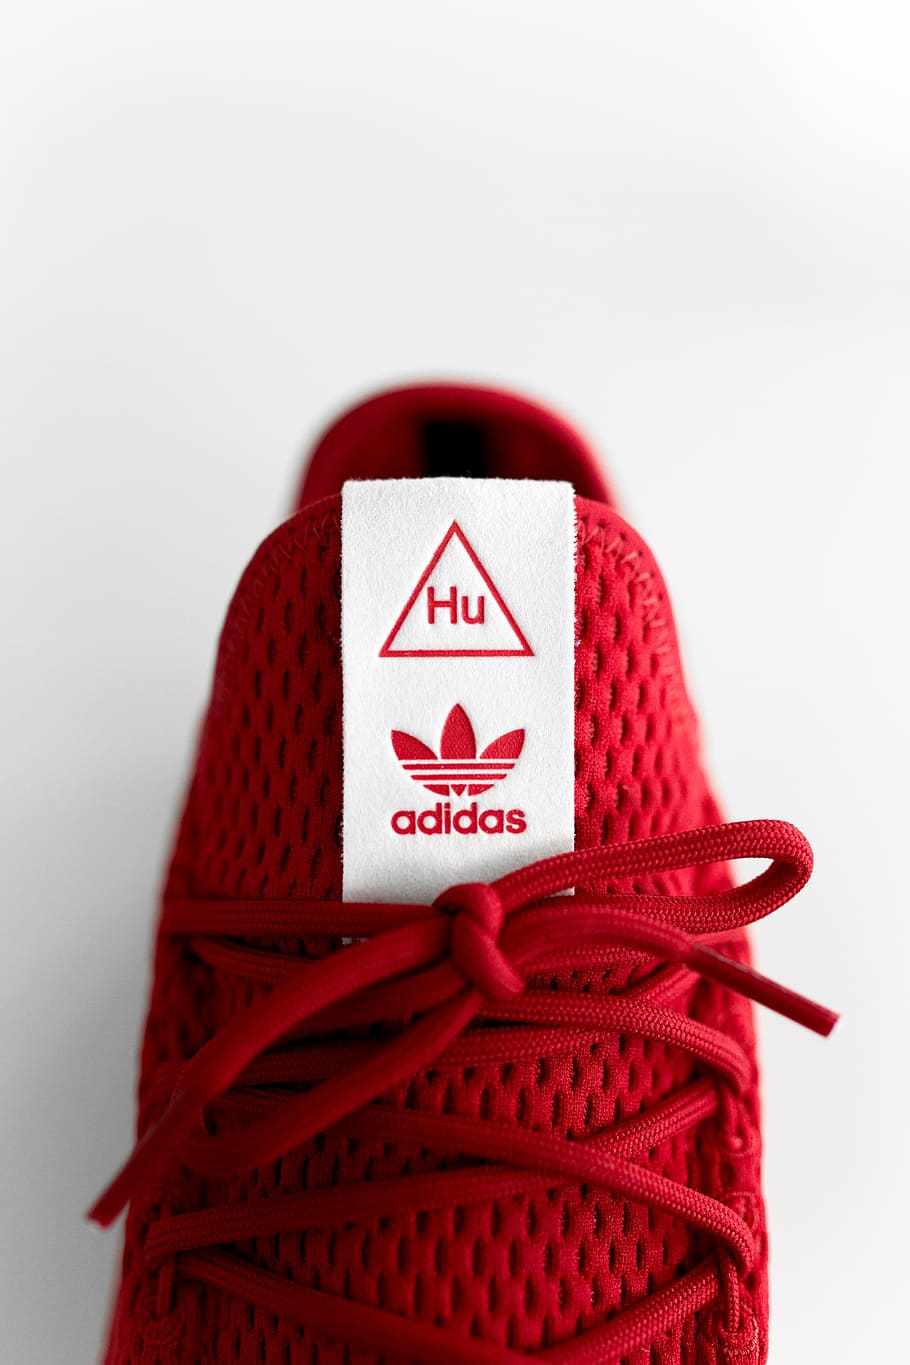 unpaired red adidas sneaker, closeup photo of unpaired red adidas Tennis HU sneaker against white background